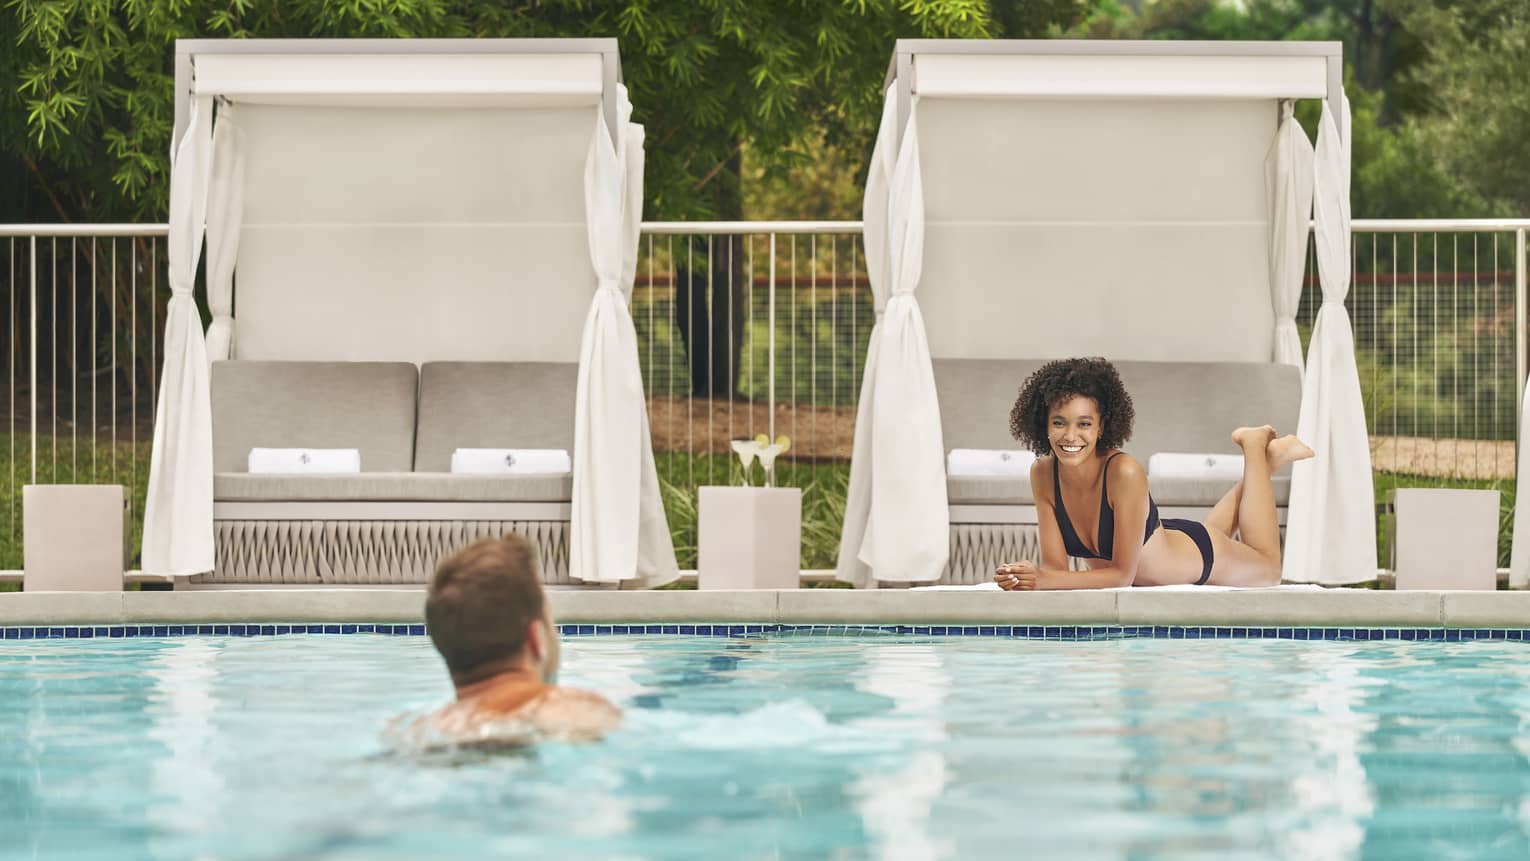 A man swimming in a pool outside with a woman resting under a cabana near the pool.